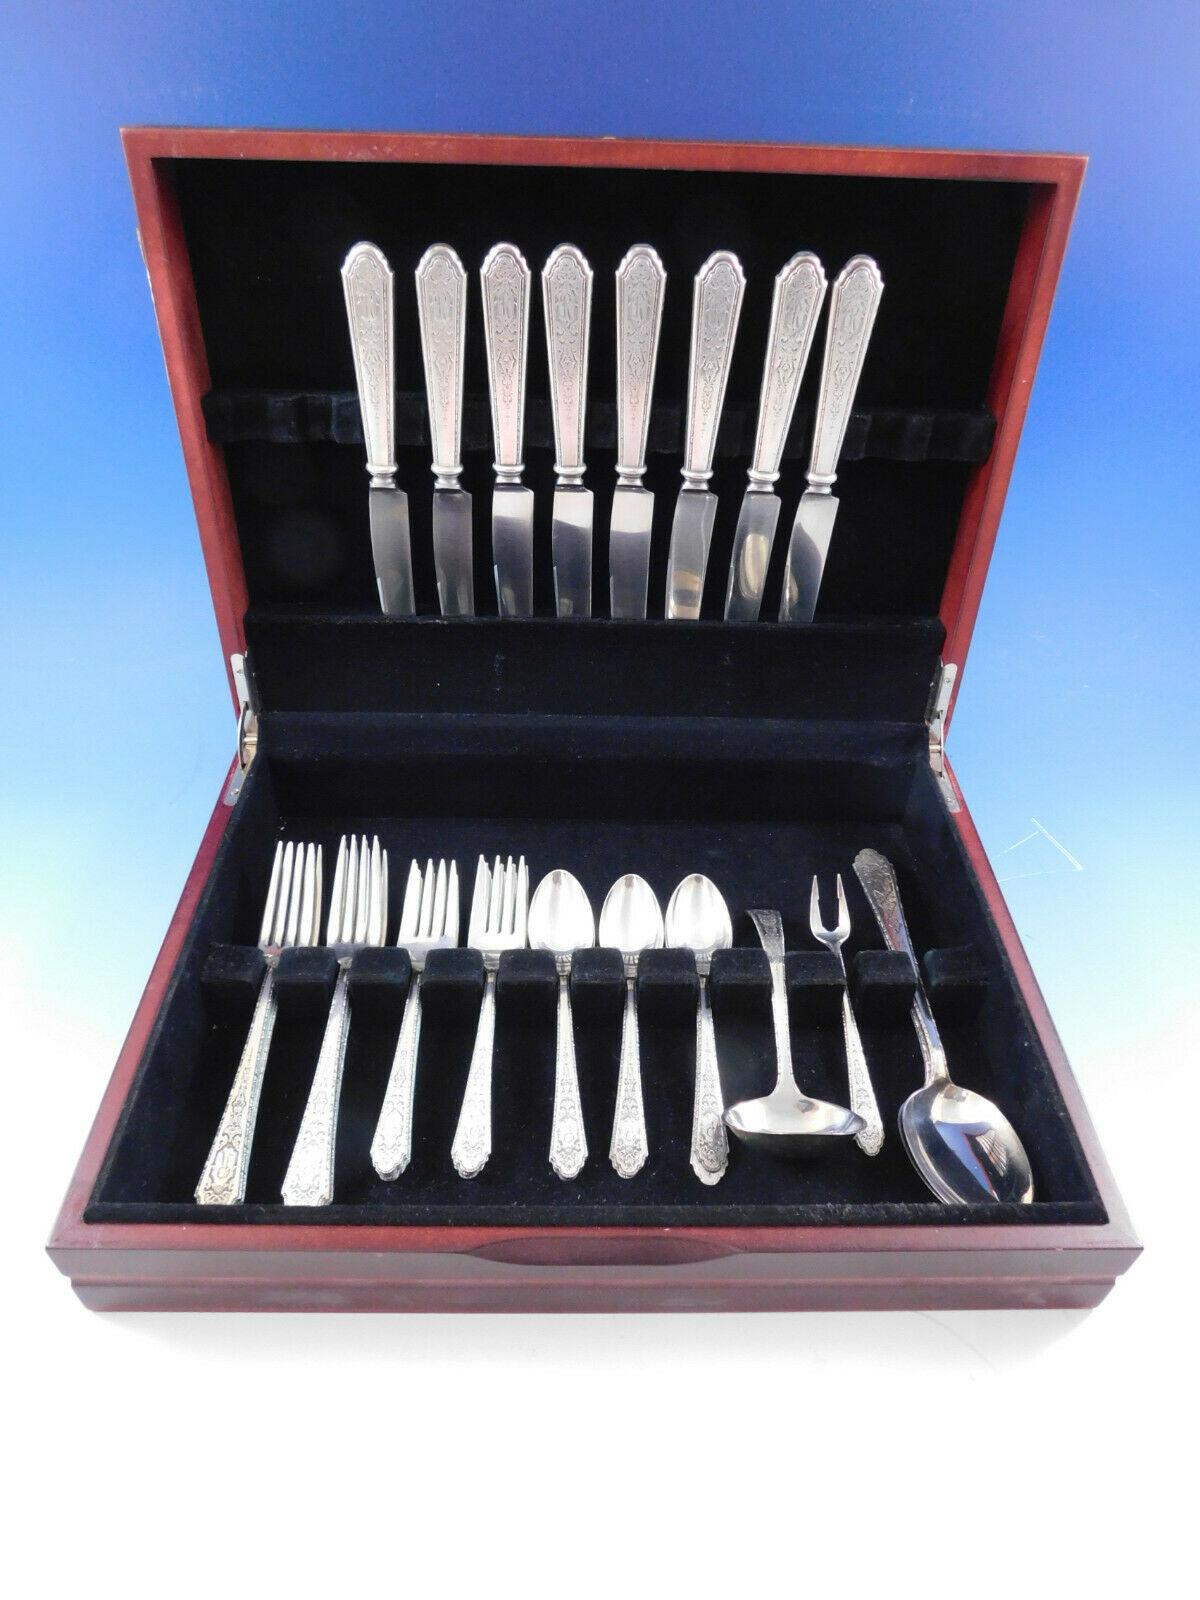 Mary II by Lunt sterling silver flatware set, 36 pieces. This set includes:

8 knives, 9